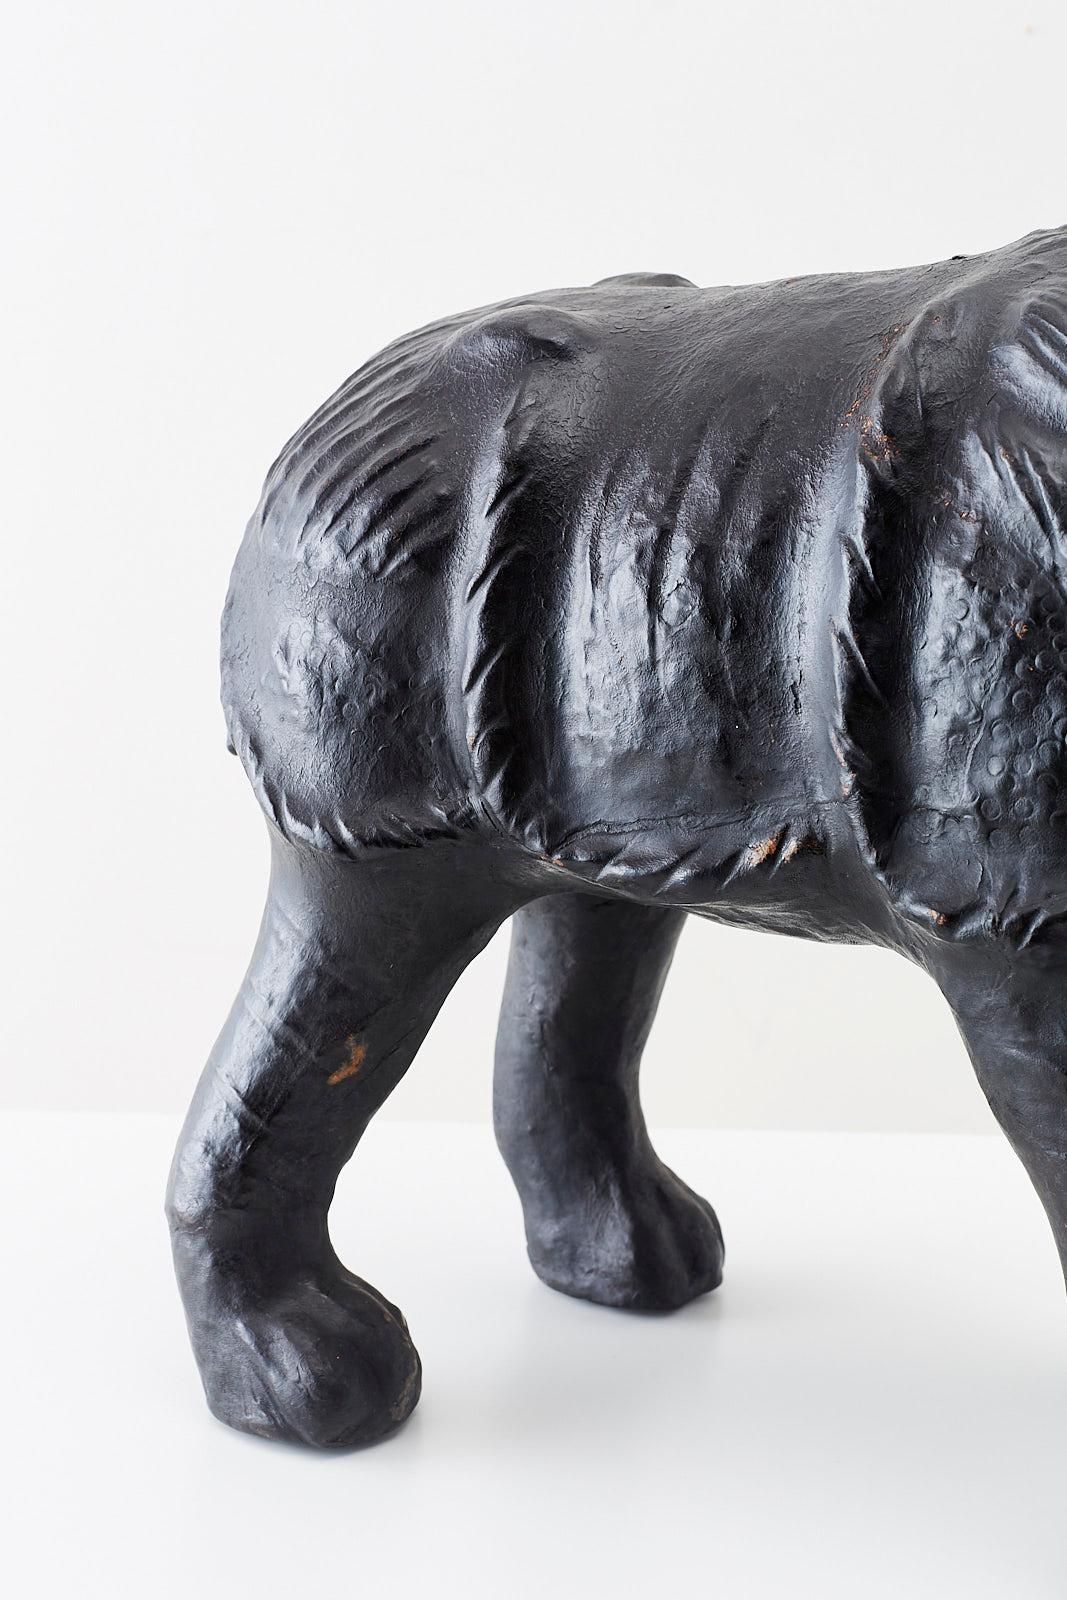 Large Leather Clad Rhino Sculpture or Footstool For Sale 1